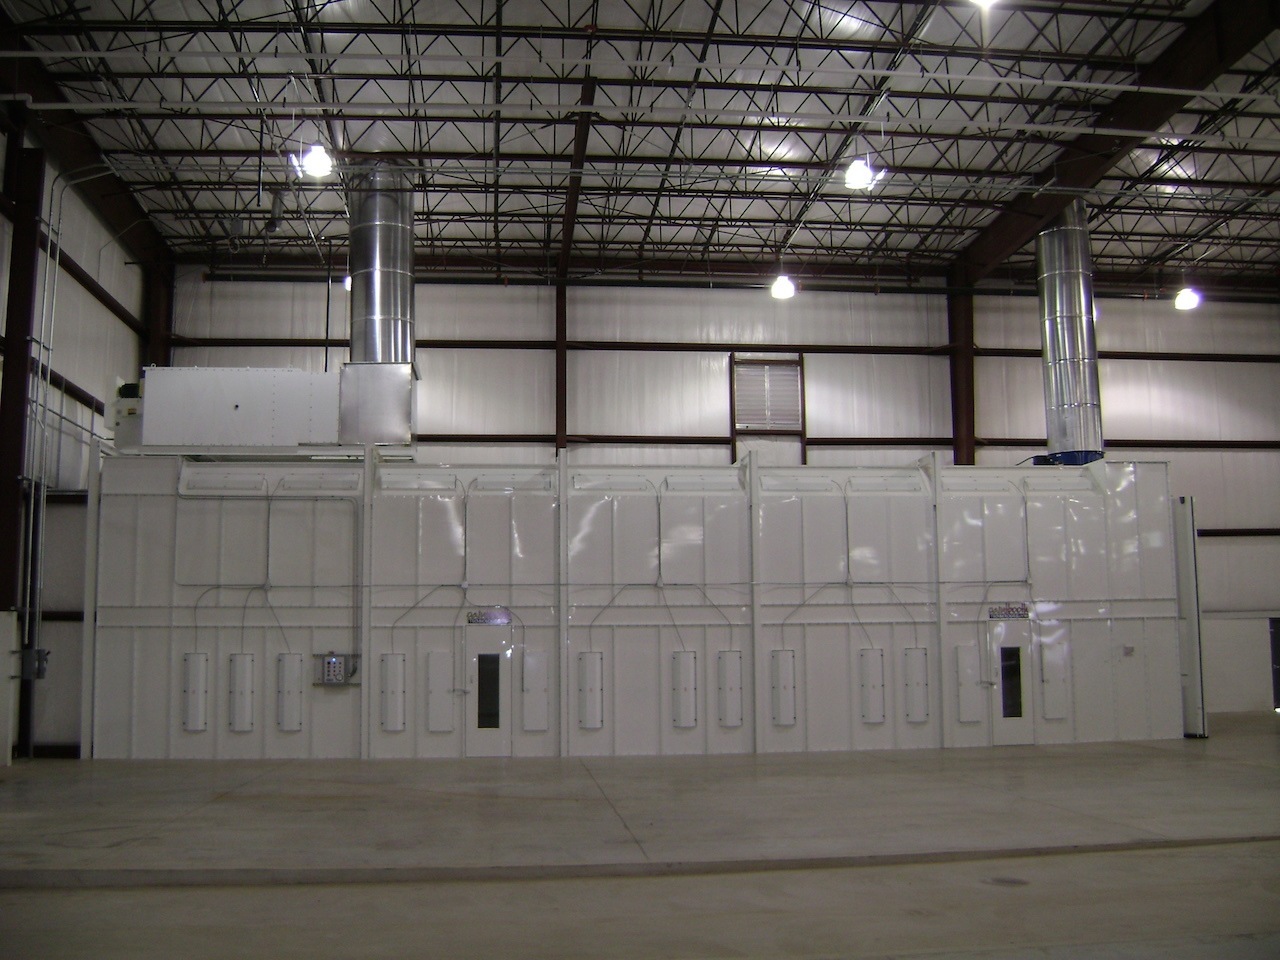 RTT Front Flow/Cross Flow Paint Spray Booth with Fluorescent Lights,  Automotive Booths: Collision Services by US Auto Supply